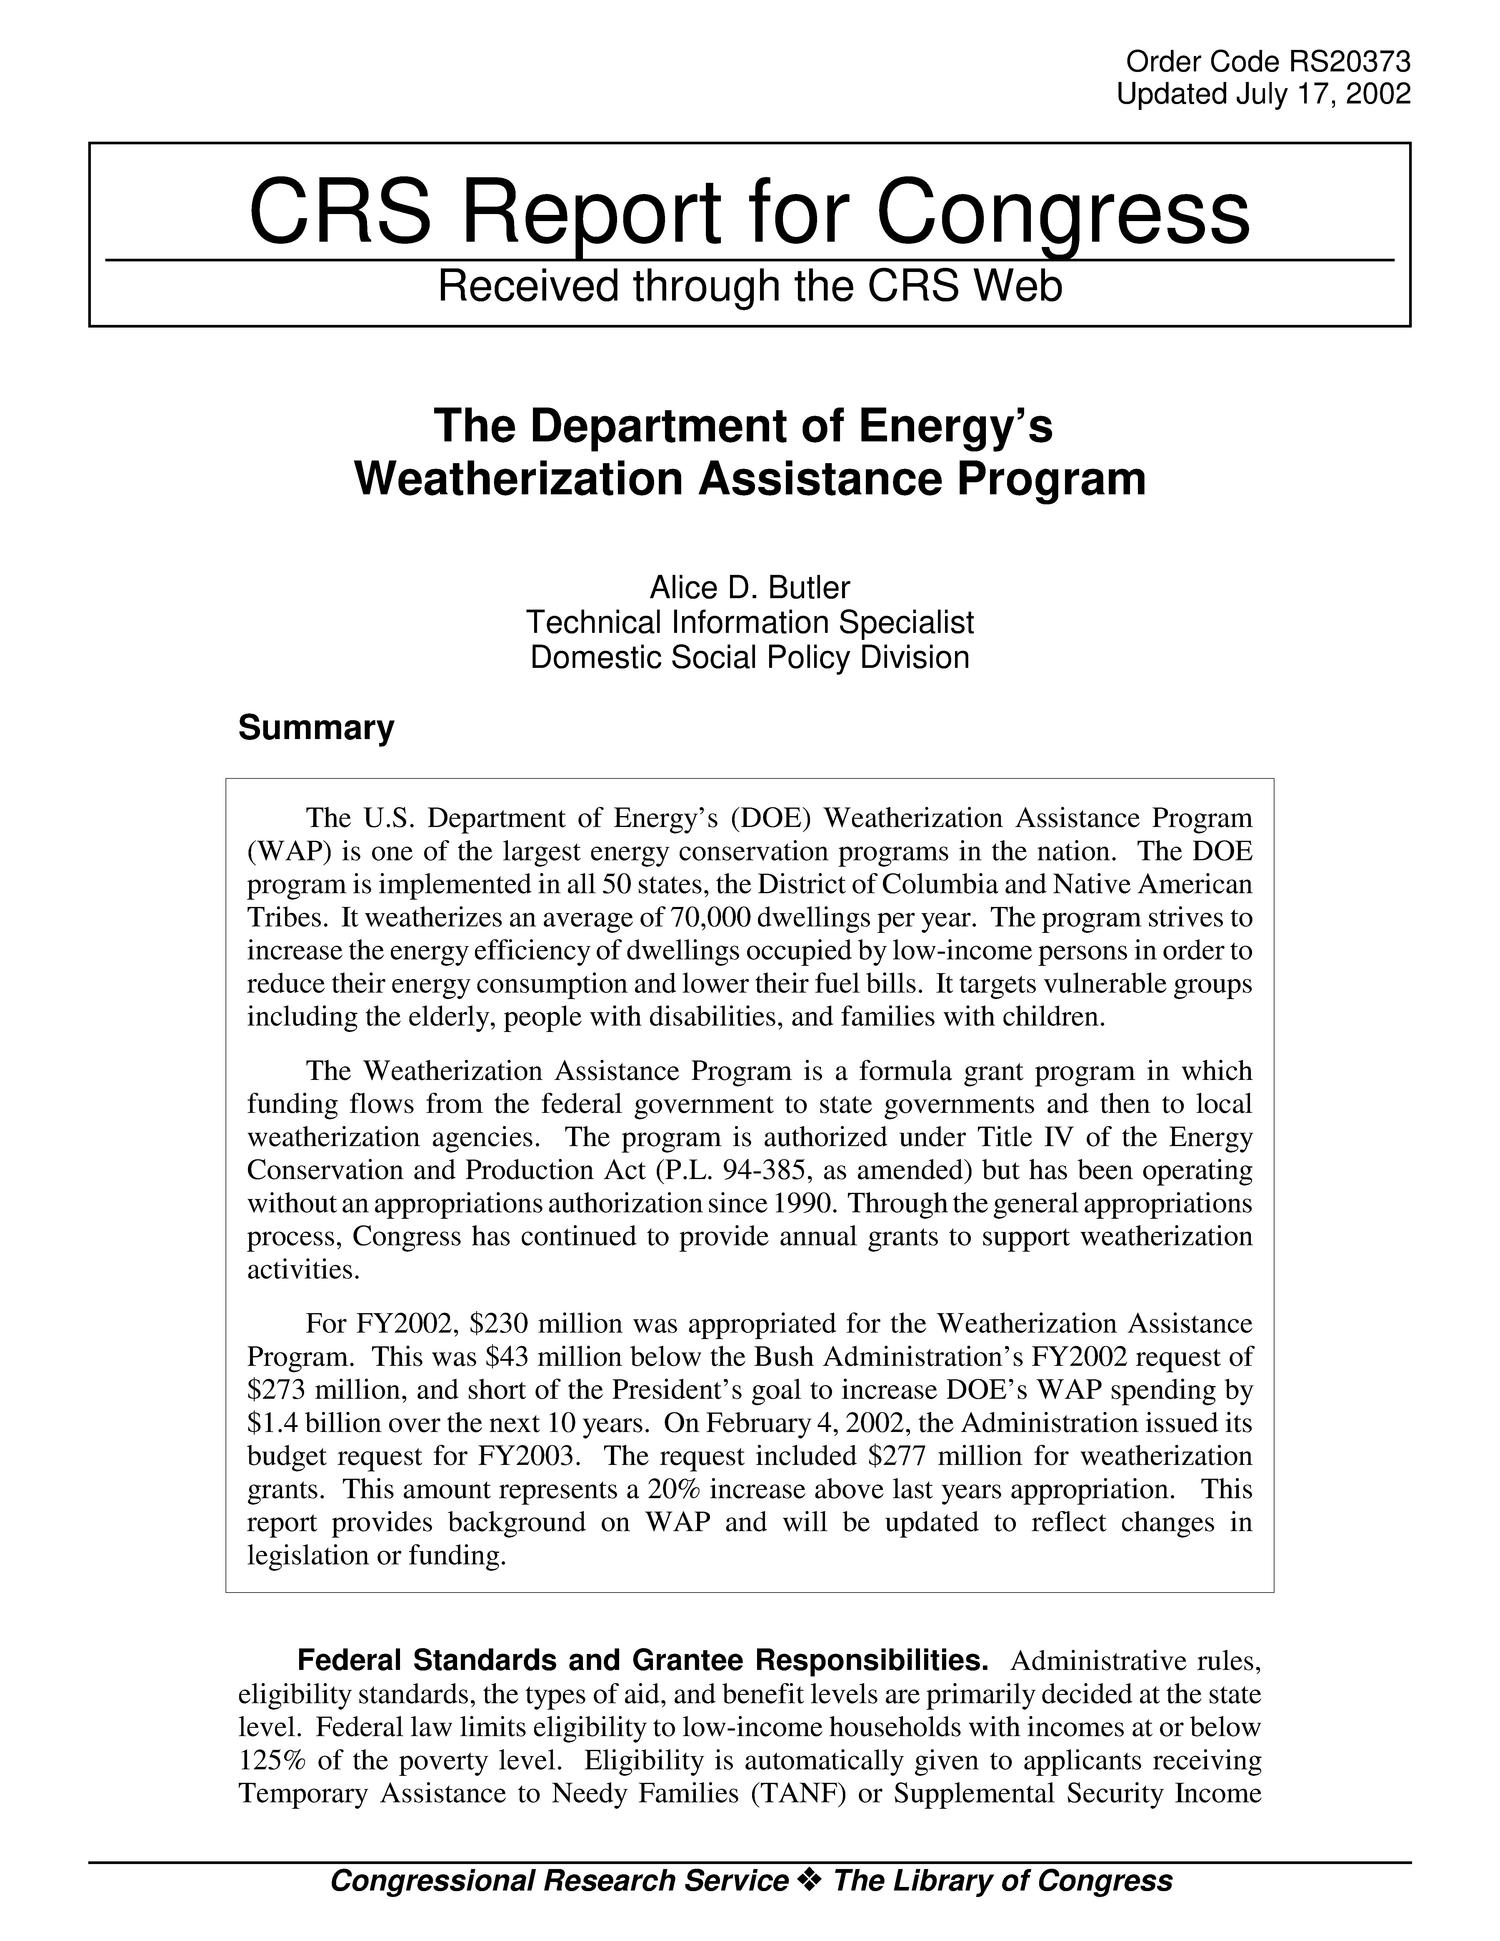 The Department of Energy's Weatherization Assistance Program
                                                
                                                    [Sequence #]: 1 of 3
                                                